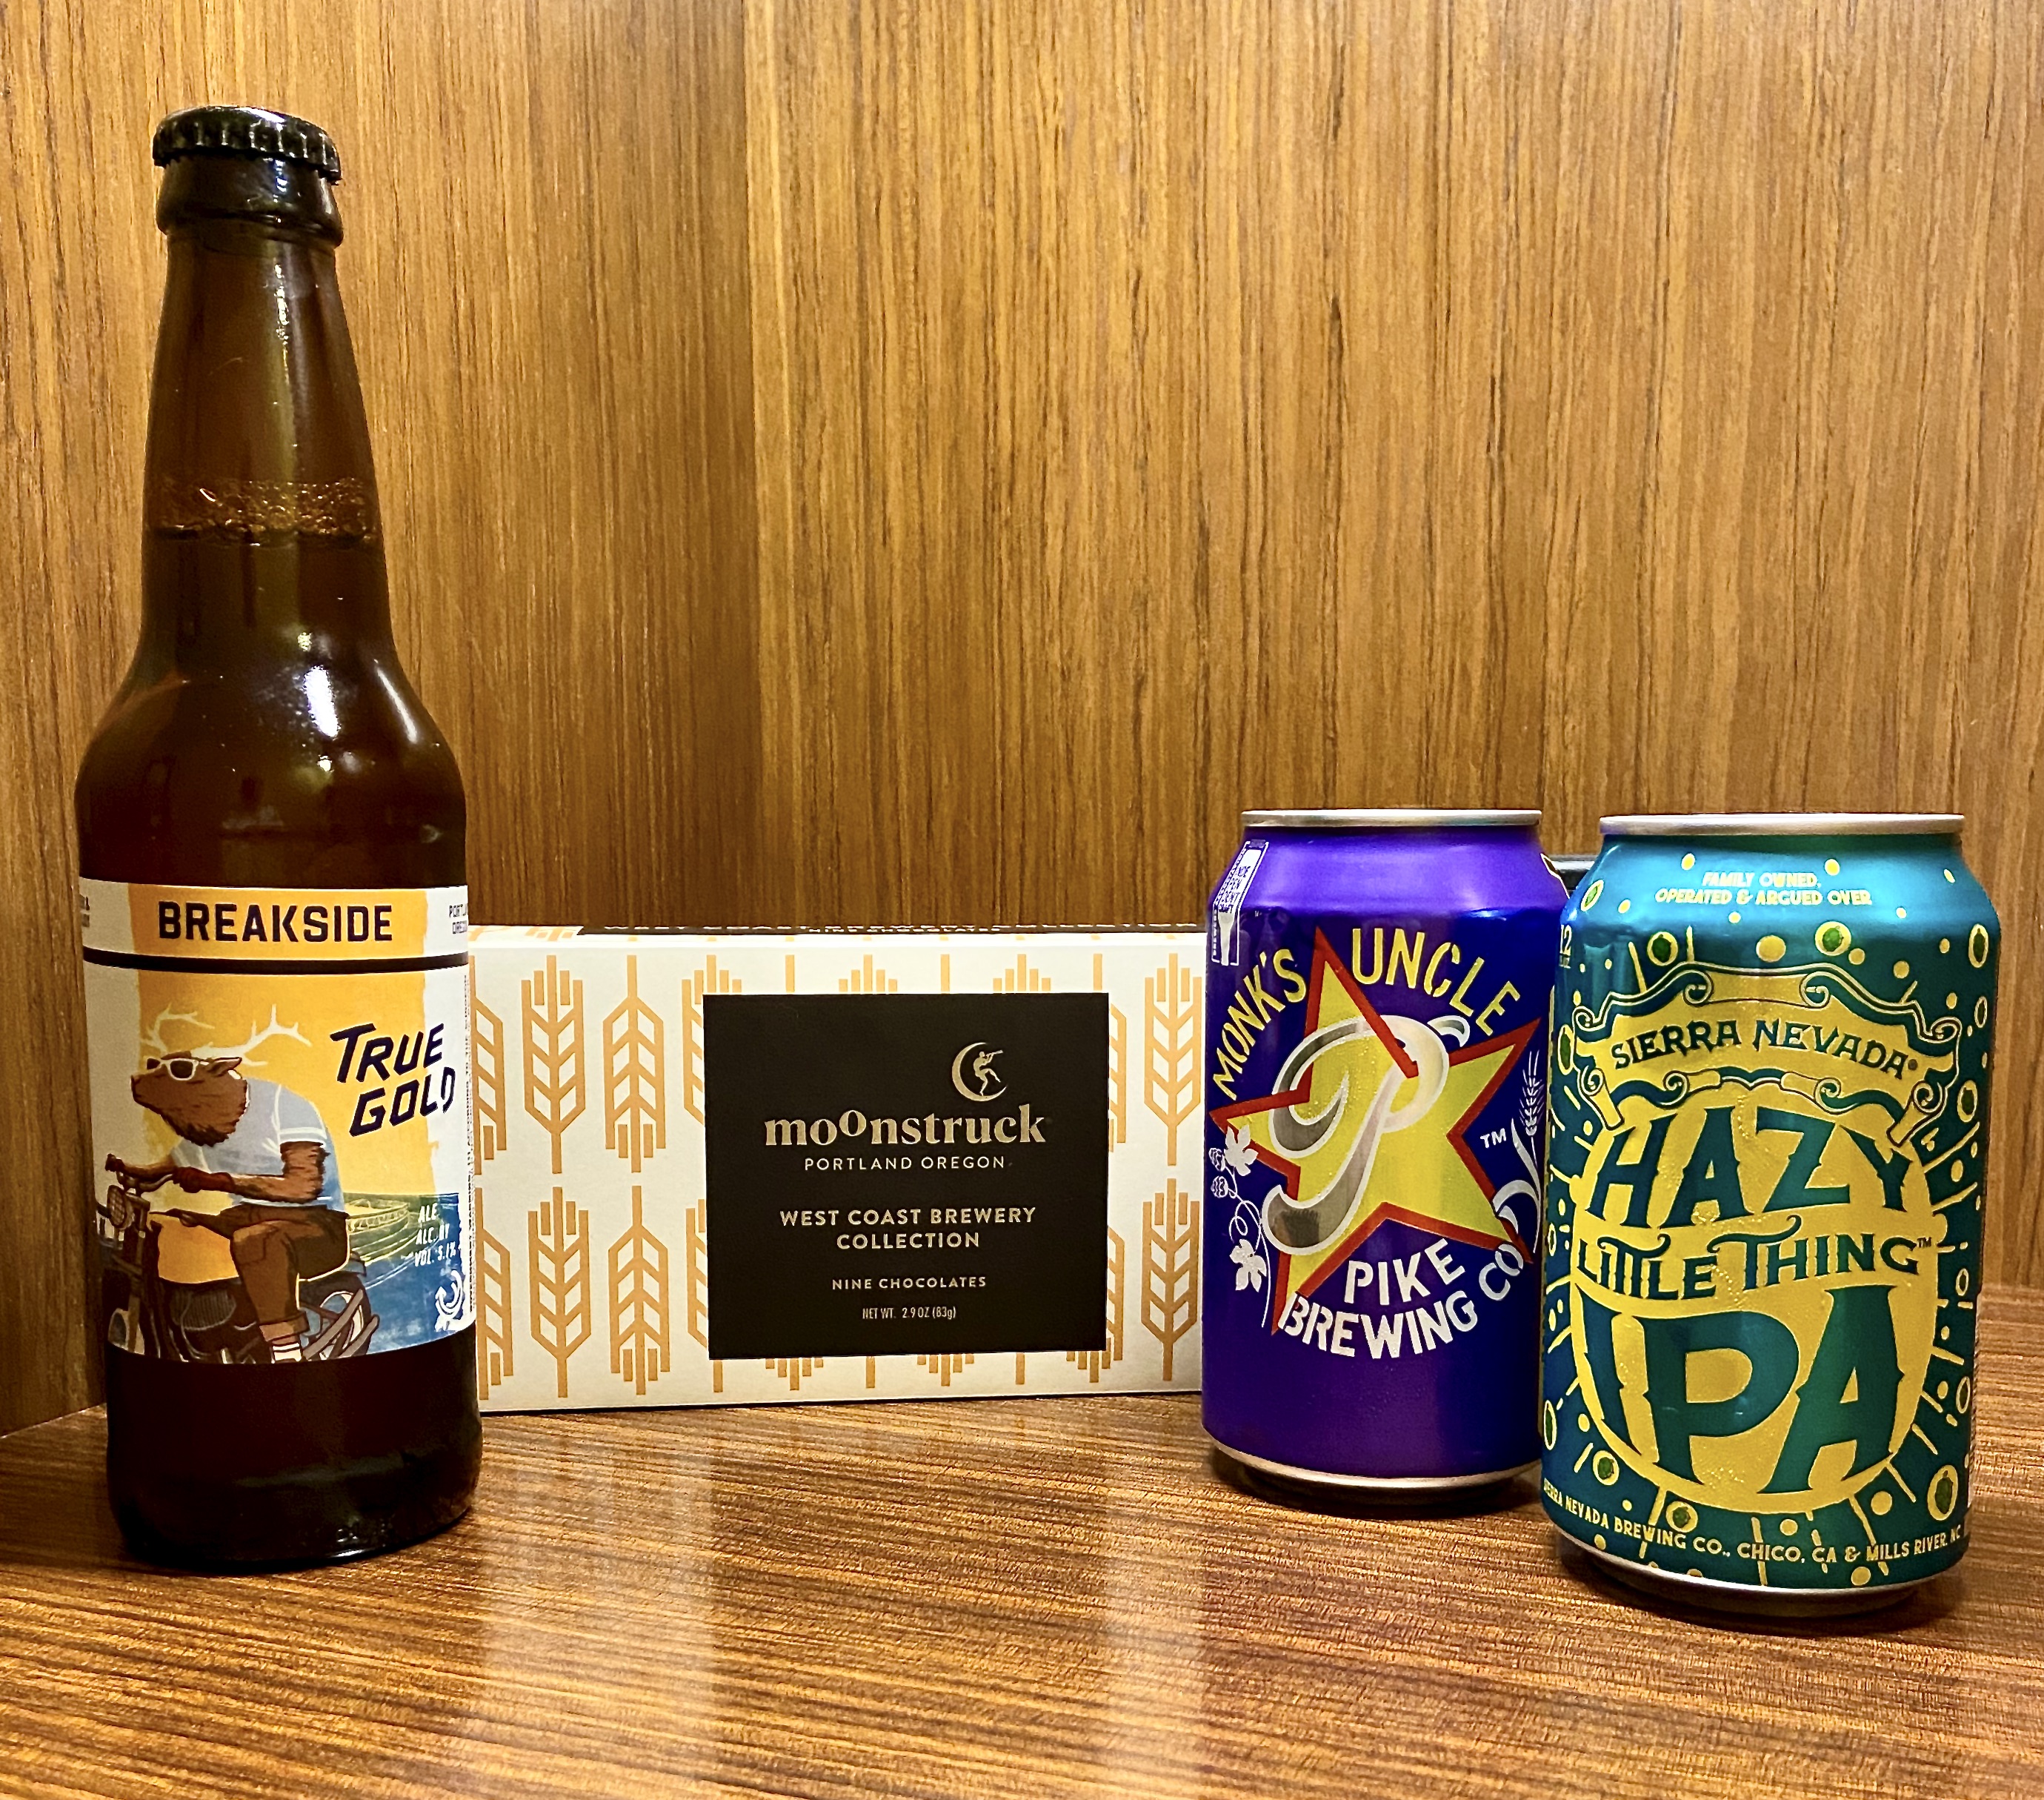 Moonstruck Chocolate West Coast Brewery Collection with Breakside Brewery’s True Gold Golden Ale, Pike Brewing’s Monk’s Uncle Tripel Ale and Sierra Nevada’s Hazy Little Thing IPA.